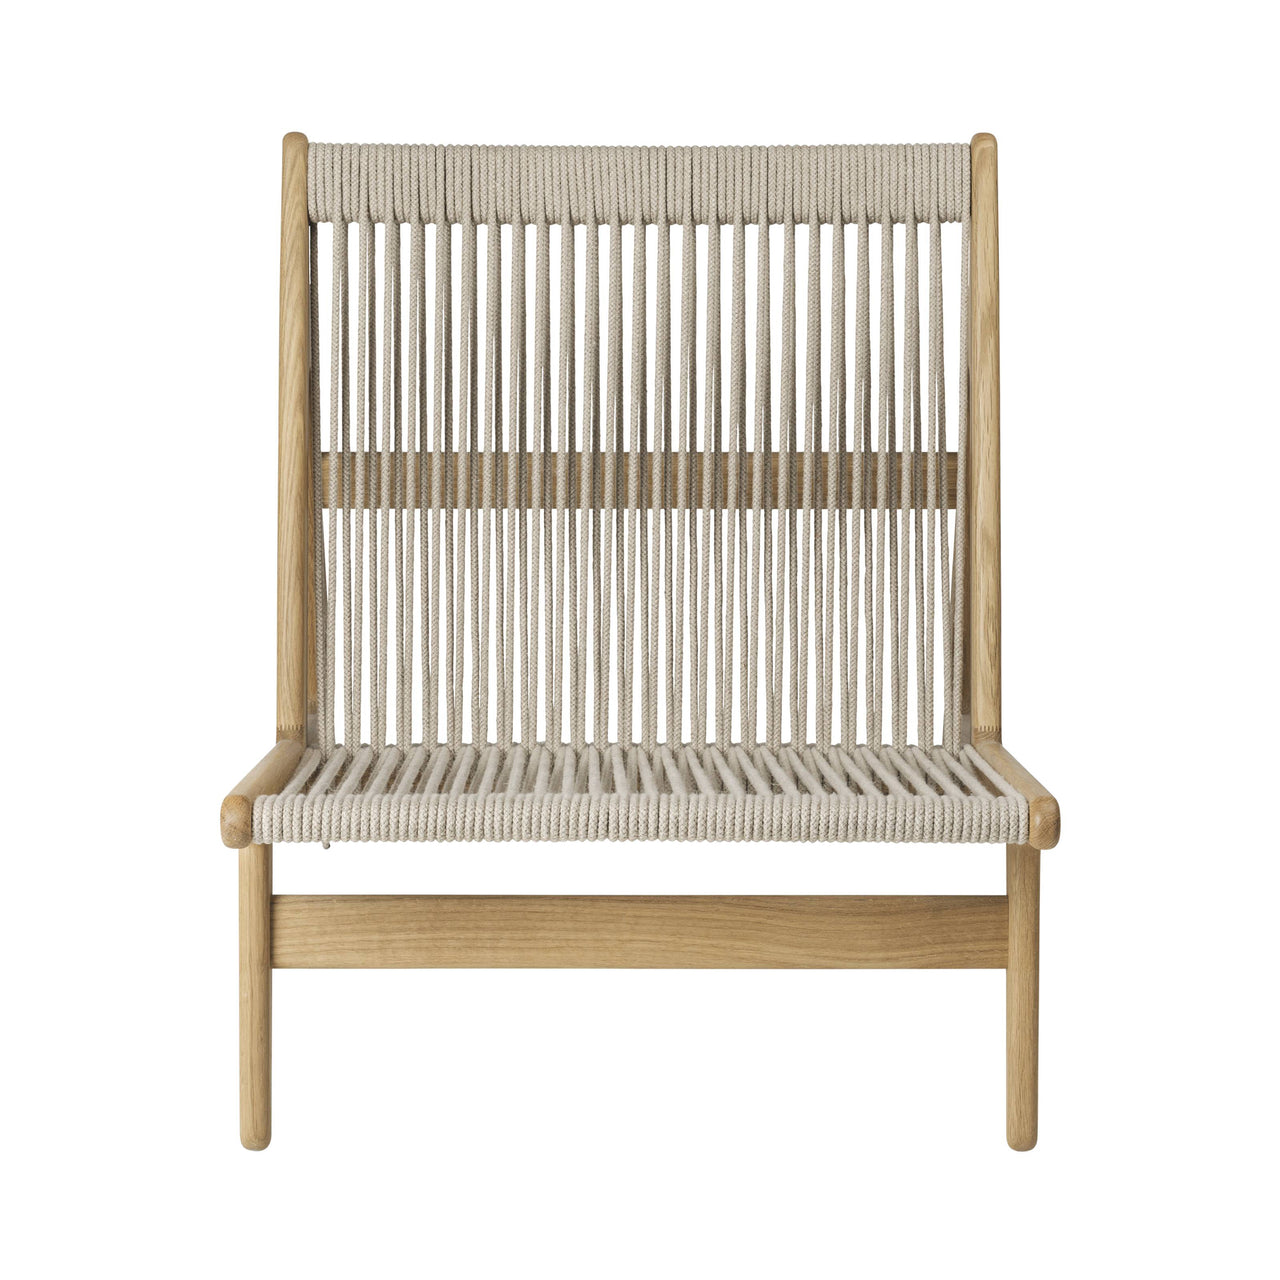 MR01 Initial Chair: Solid Oak